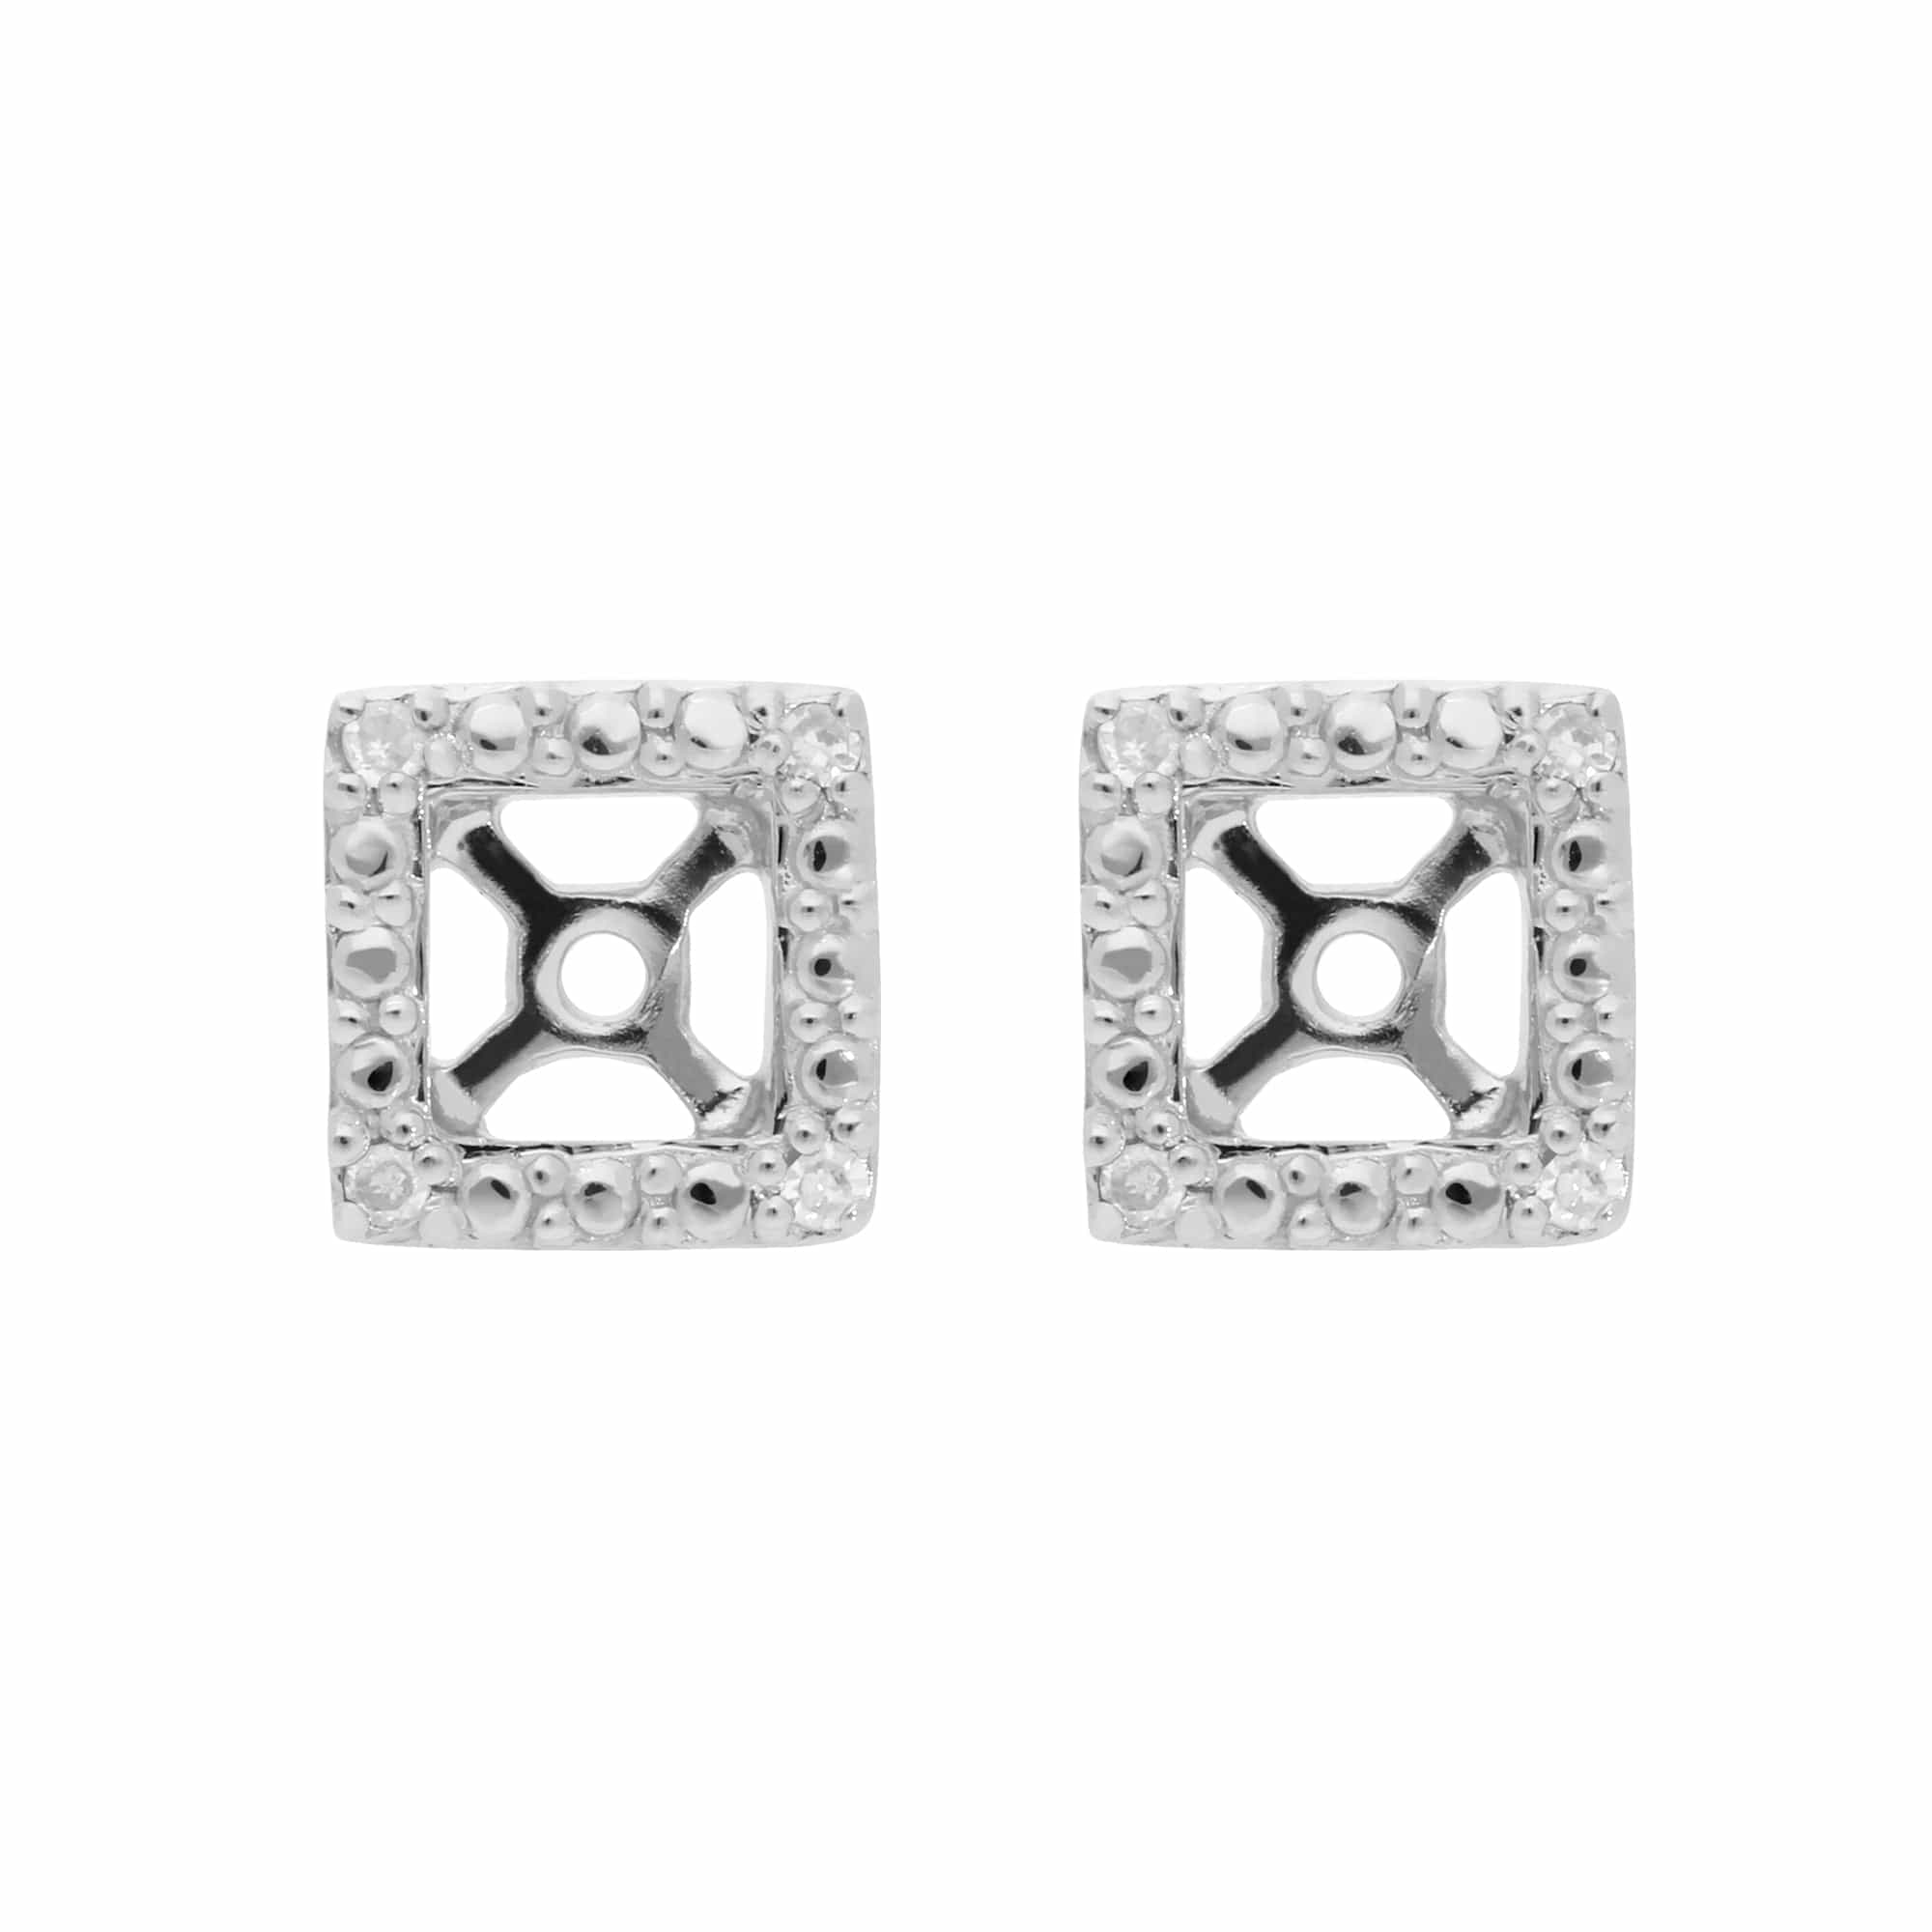 Classic Round Black Onyx Stud Earrings with Detachable Diamond Square Ear Jacket in 9ct White Gold - Gemondo